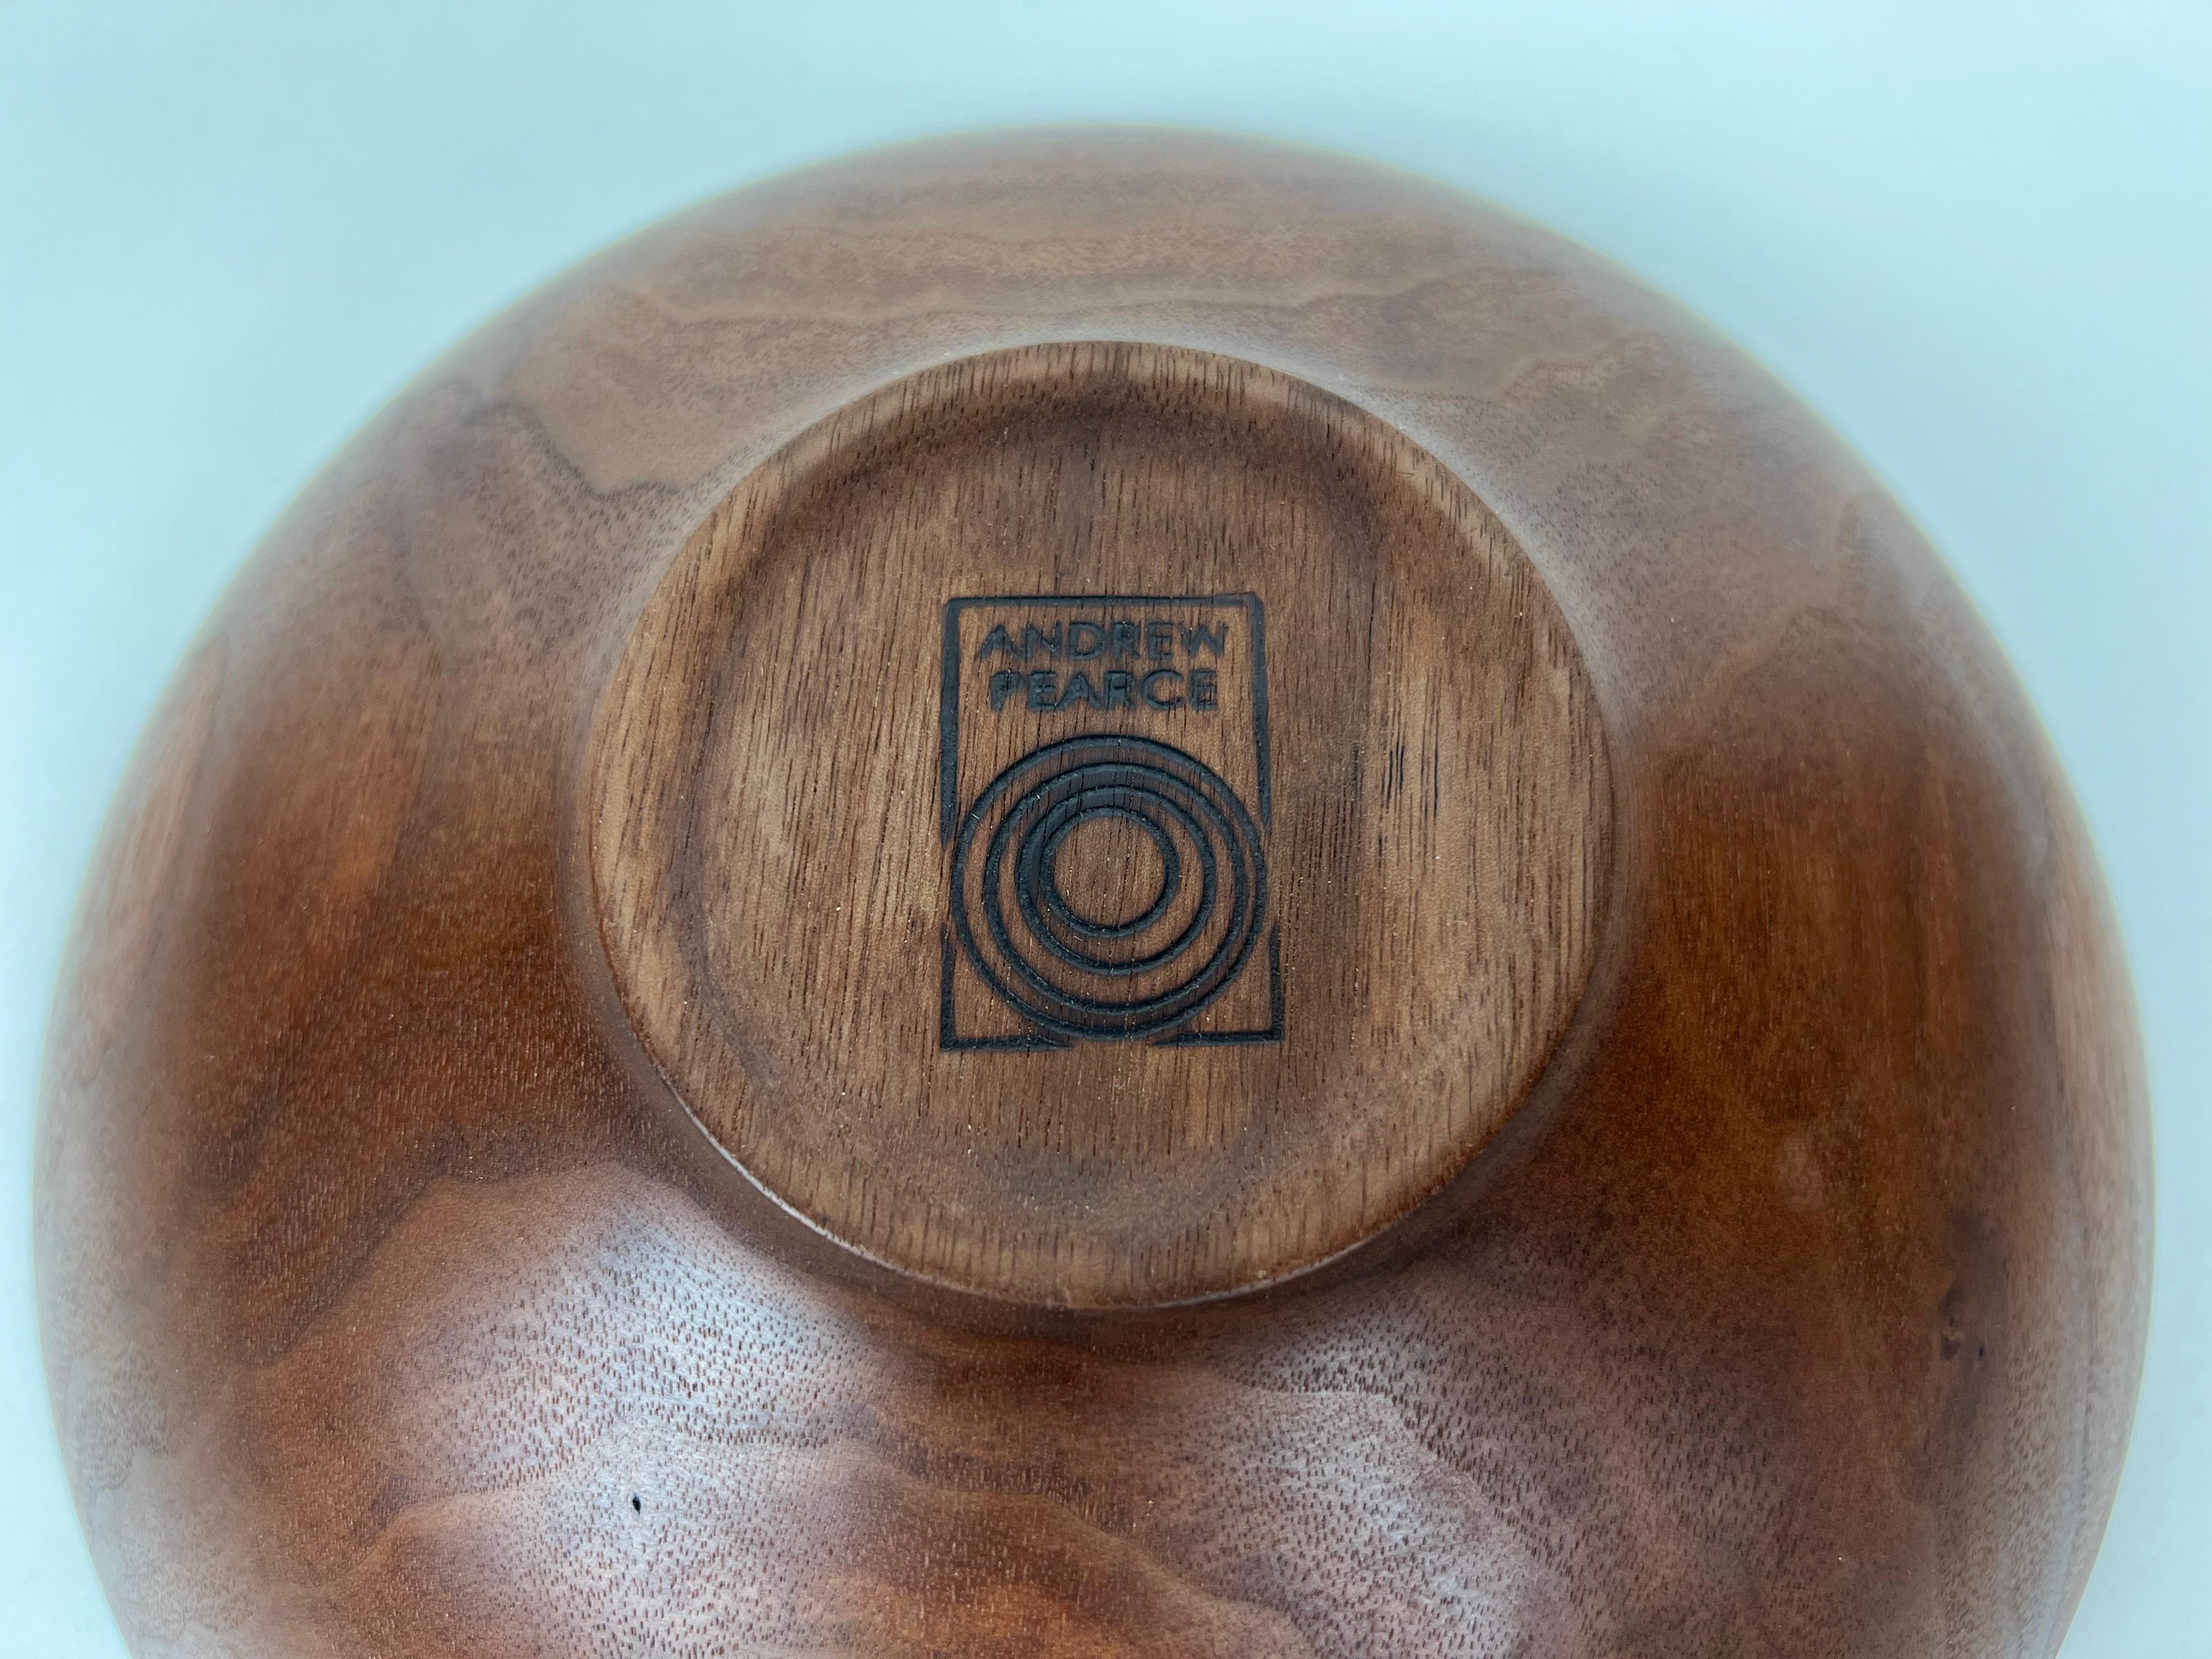 Andrew Pearce Walnut Champlain Serving Bowl In Excellent Condition For Sale In Fort Lauderdale, FL